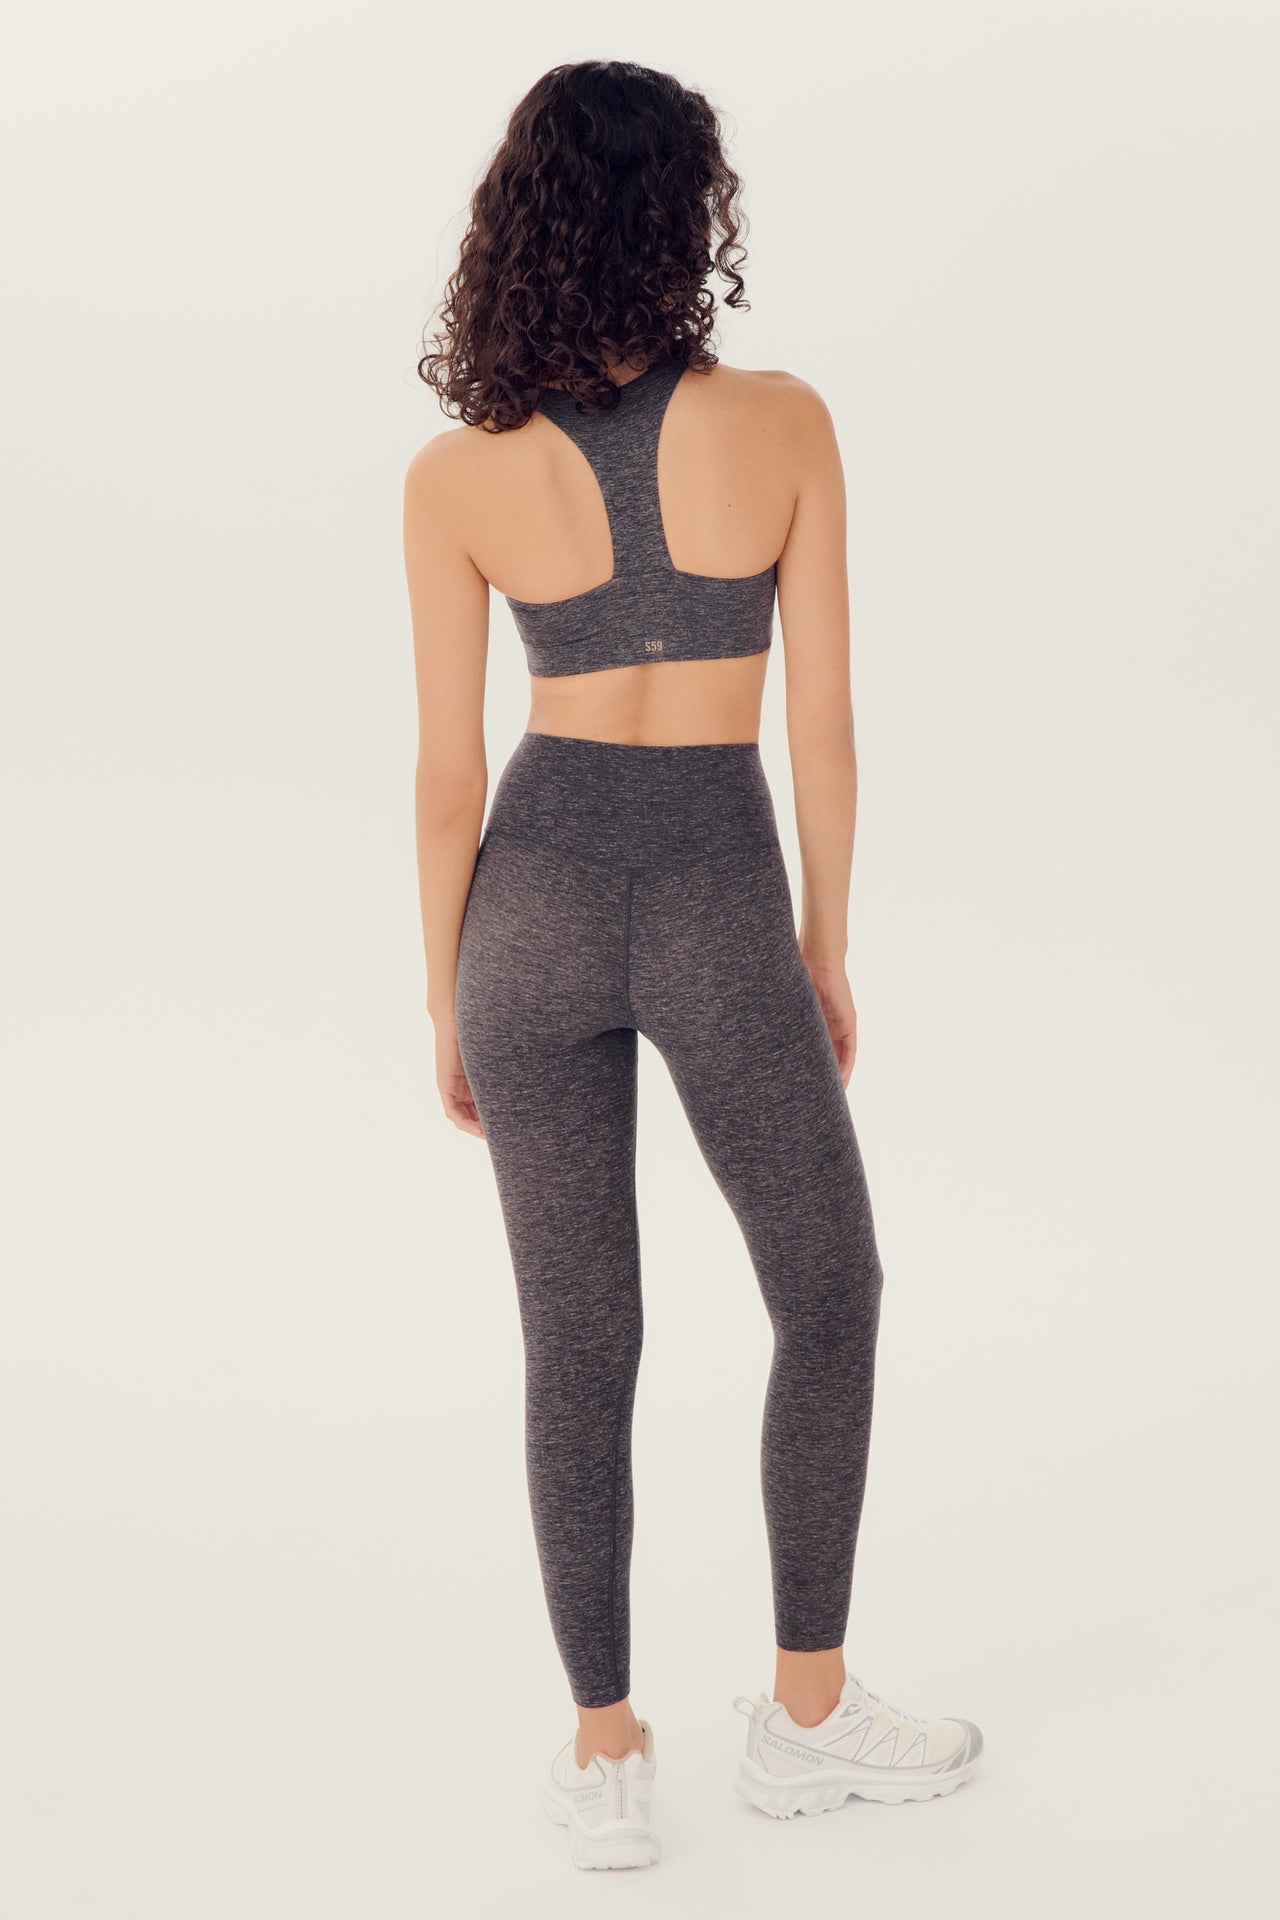 Full back view of girl wearing highwasited grey leggings with grey sports bra and white shoes